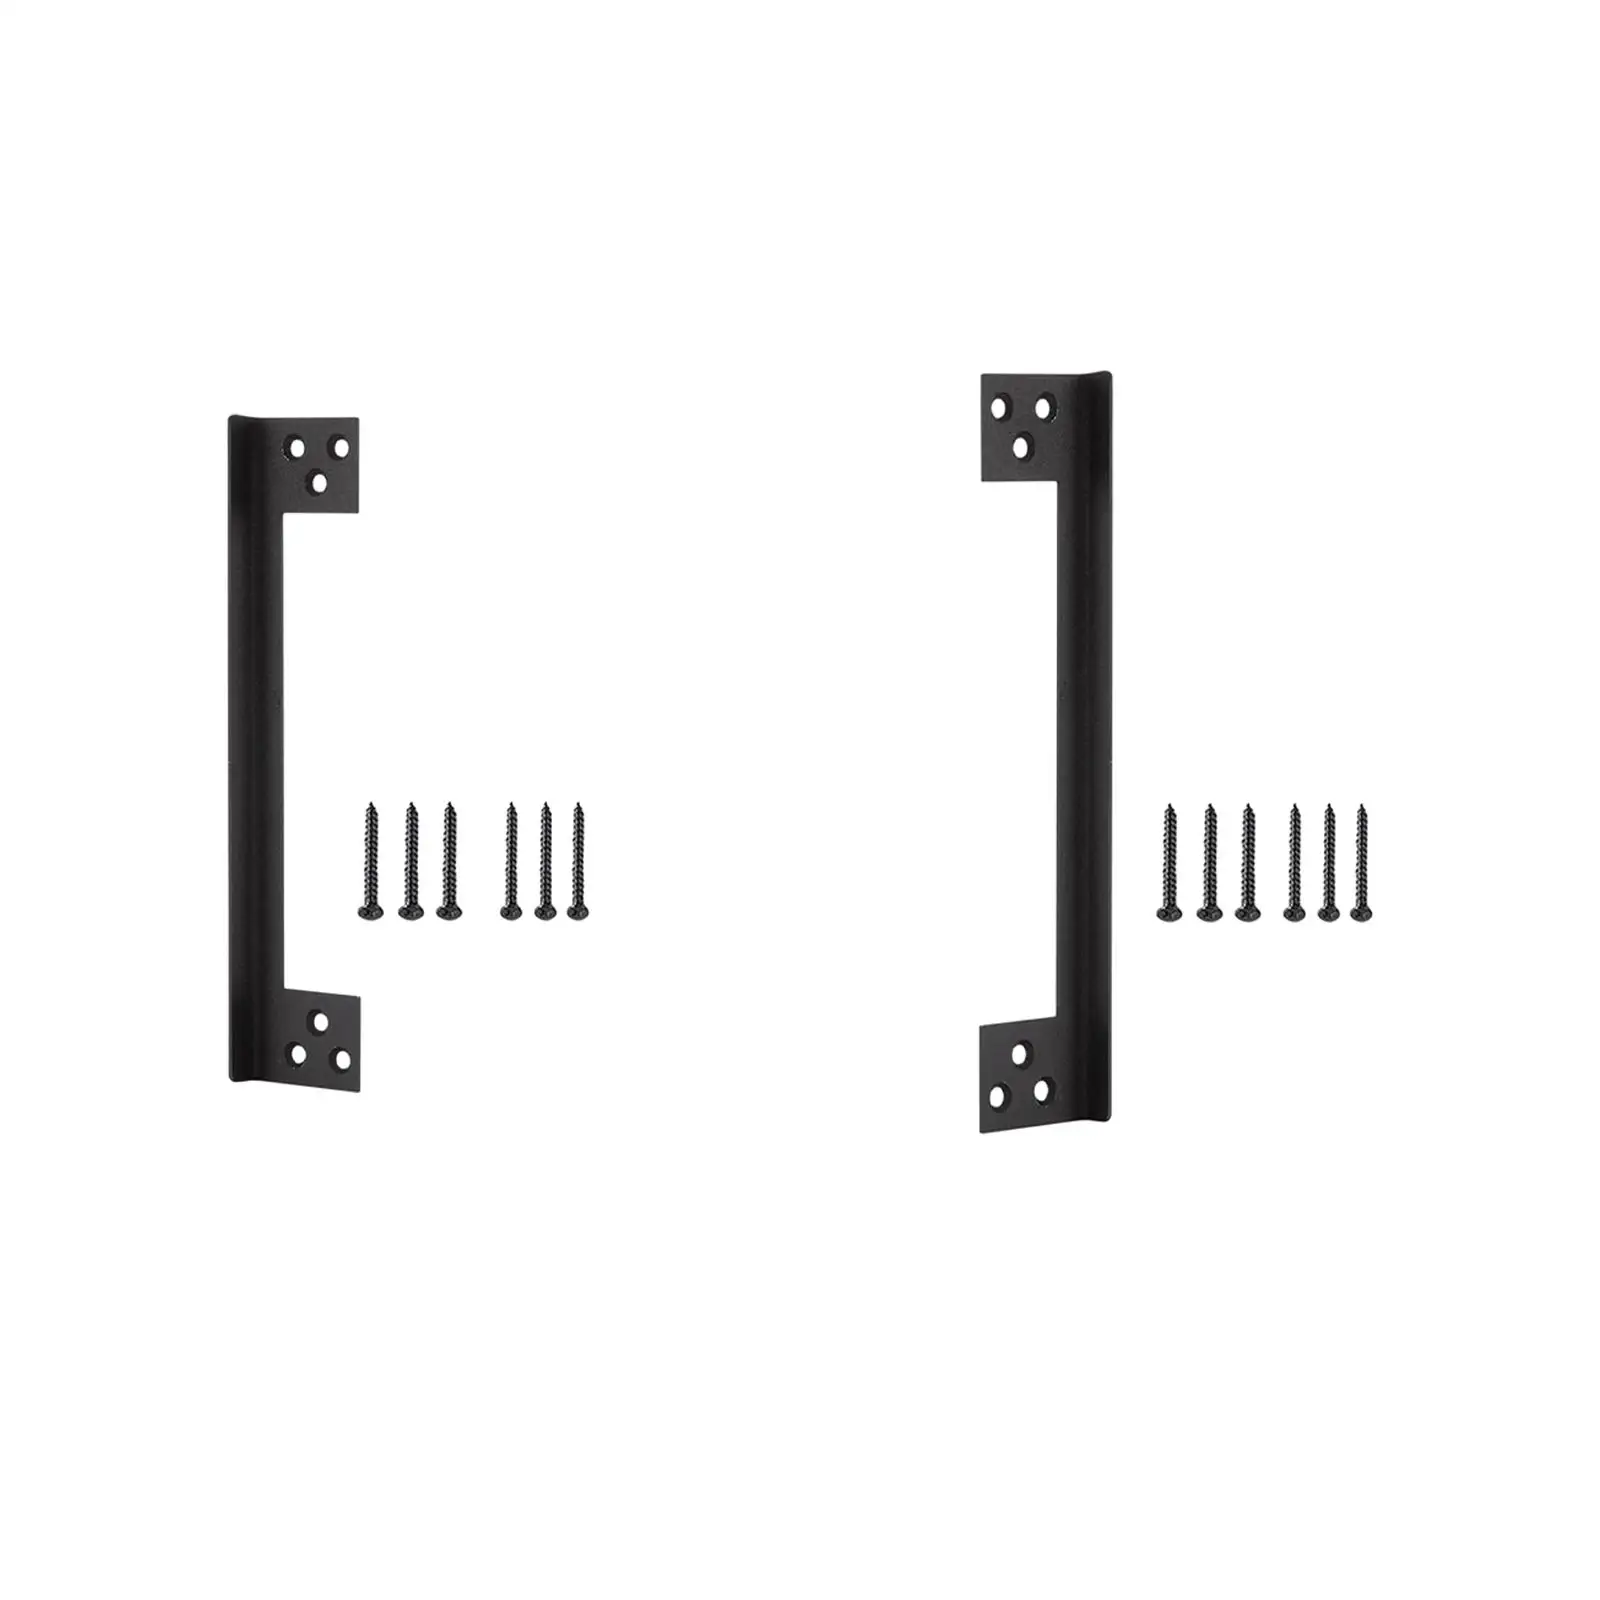 Door Latch Guard Plate Protect against Forced Entry Black for Left or Right Hand Doors Outswing Door Security Protector L Shaped